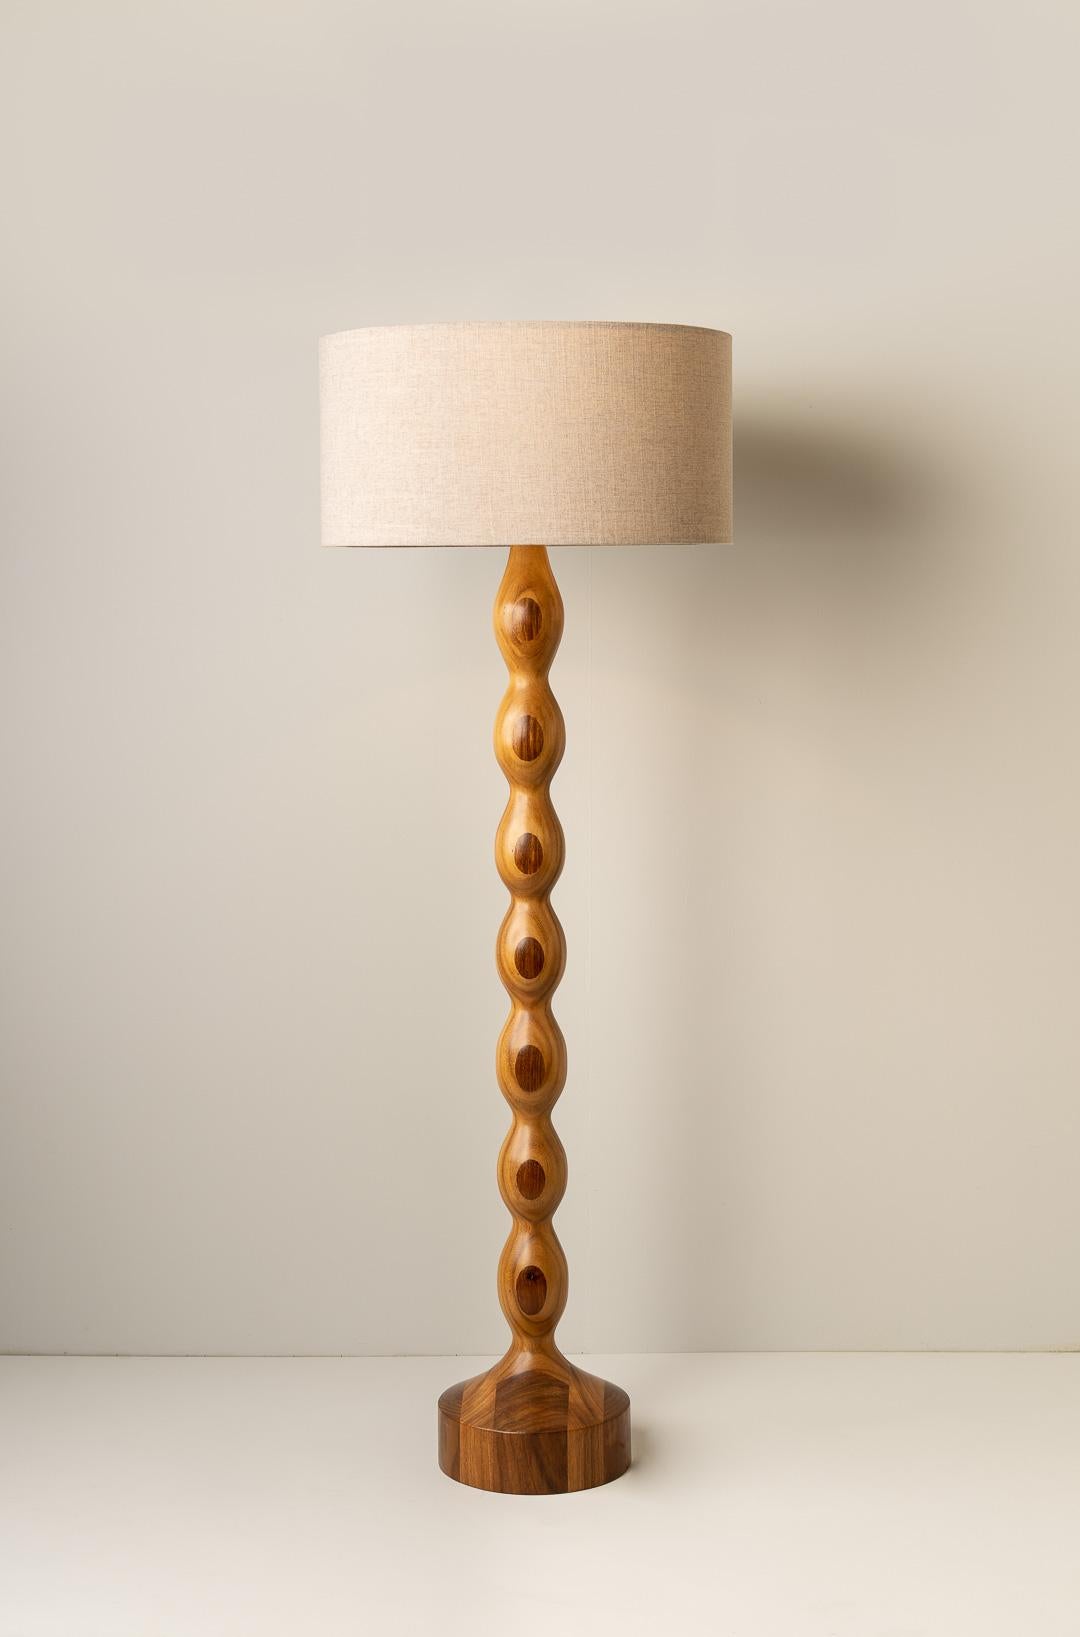 TAMARINDO floor lamp was designed for the De Palo collection by Mexican artist Isabel Moncada.

Its symmetrical undulated base is timeless with proportions and finishes that turn Tamarindo into an eclectic yet contemporary piece. It uses a low-watt